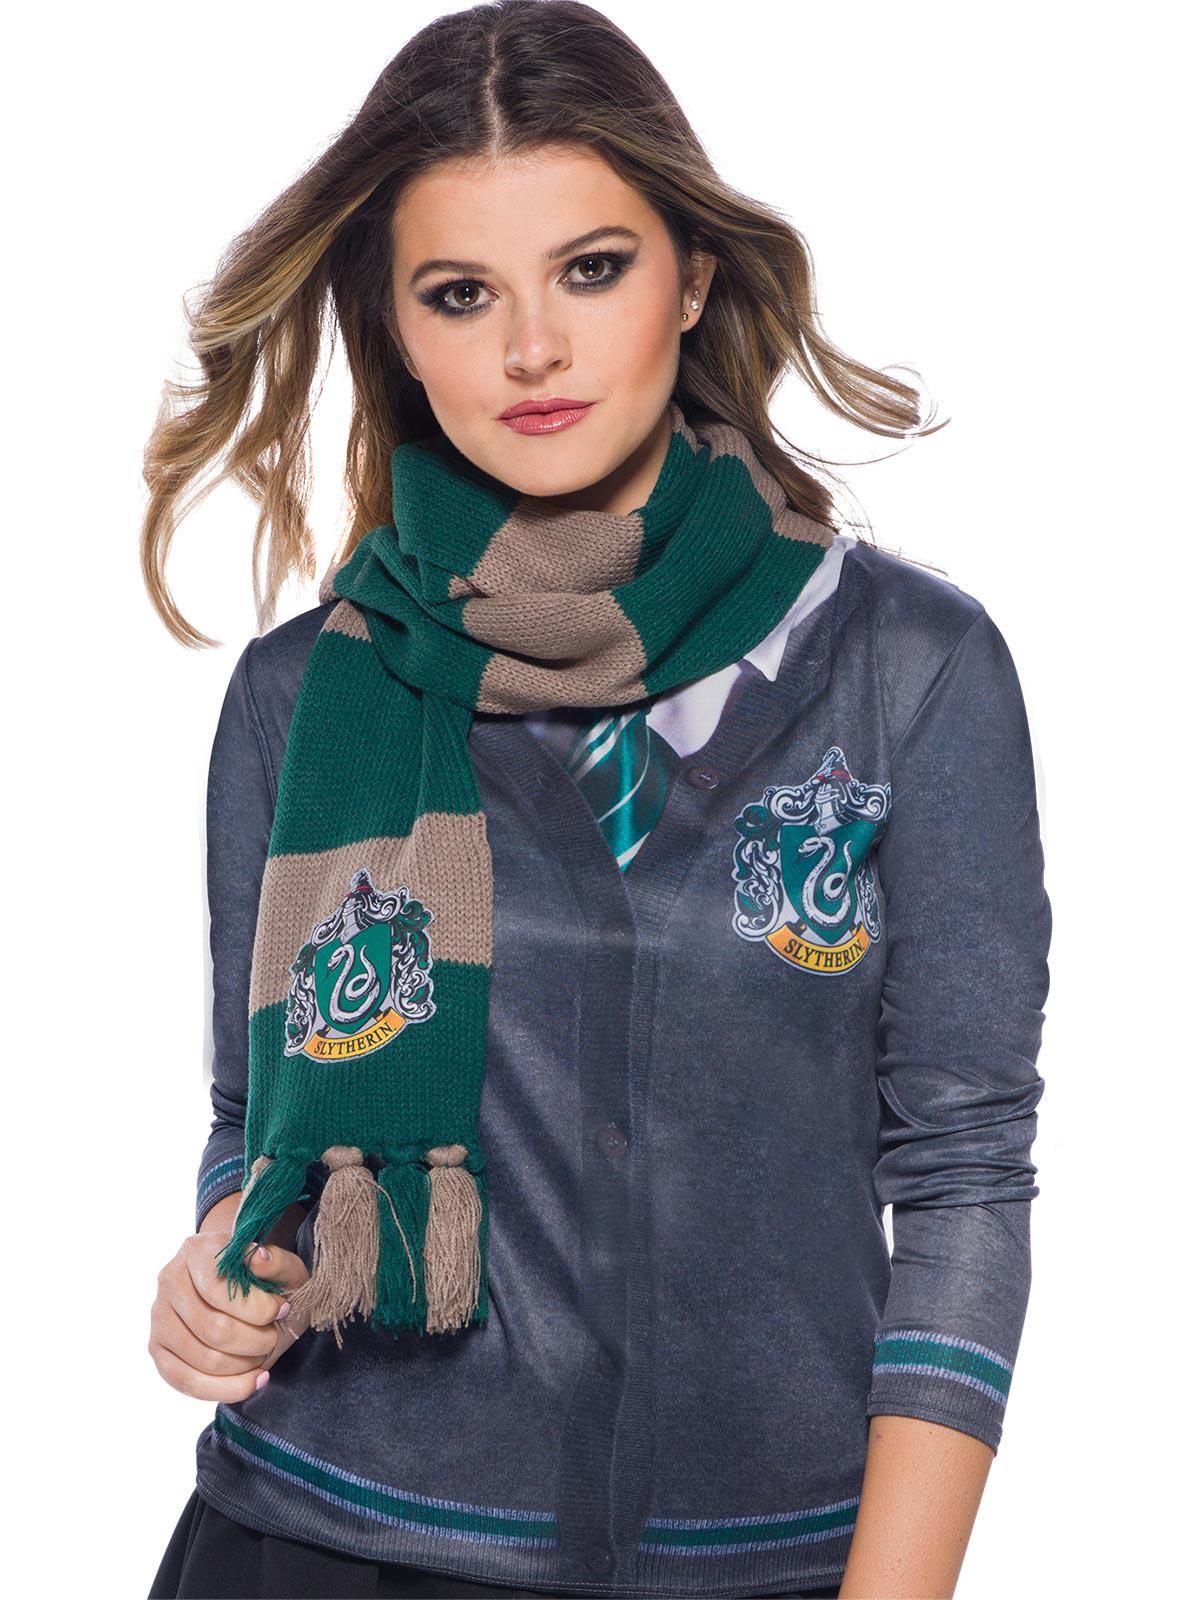 Slytherin Deluxe Scarf Kids